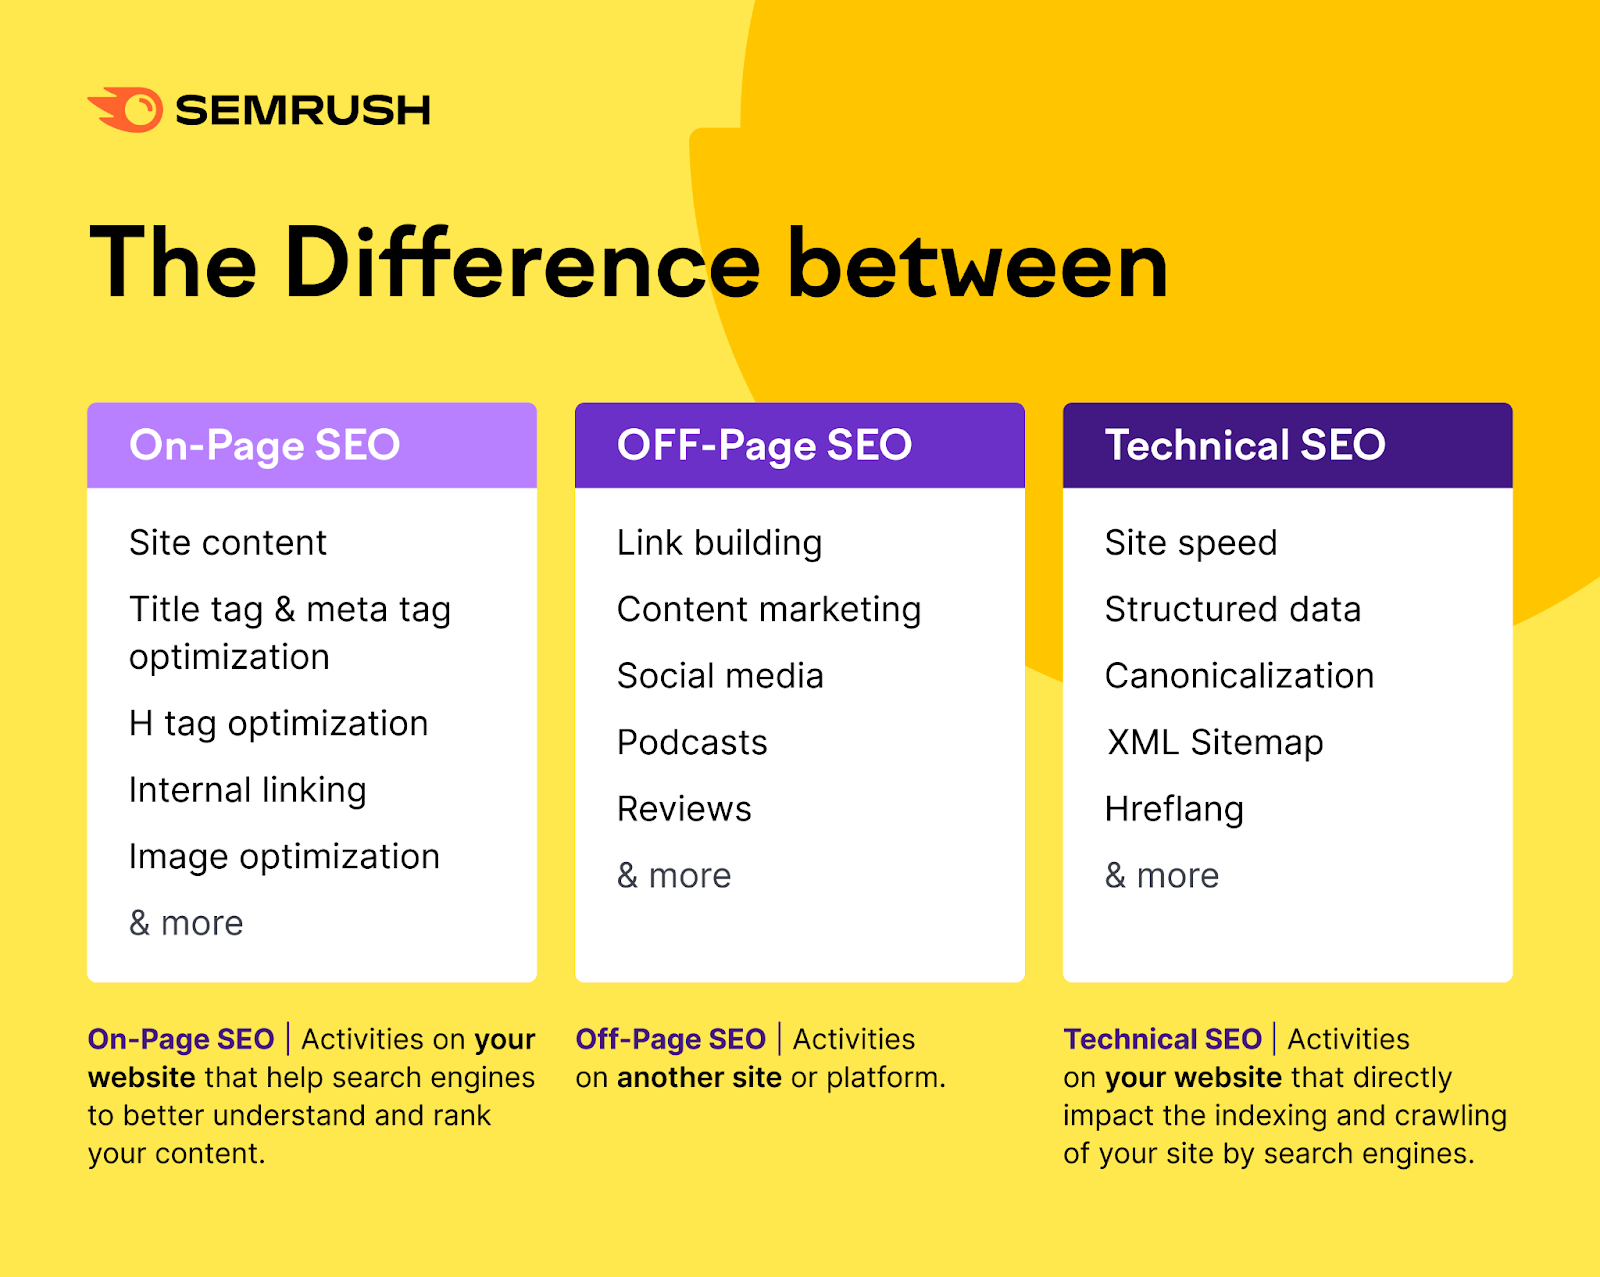 An infographic by Semrush showing the difference between on-page SEO, off-page SEO and technical SEO